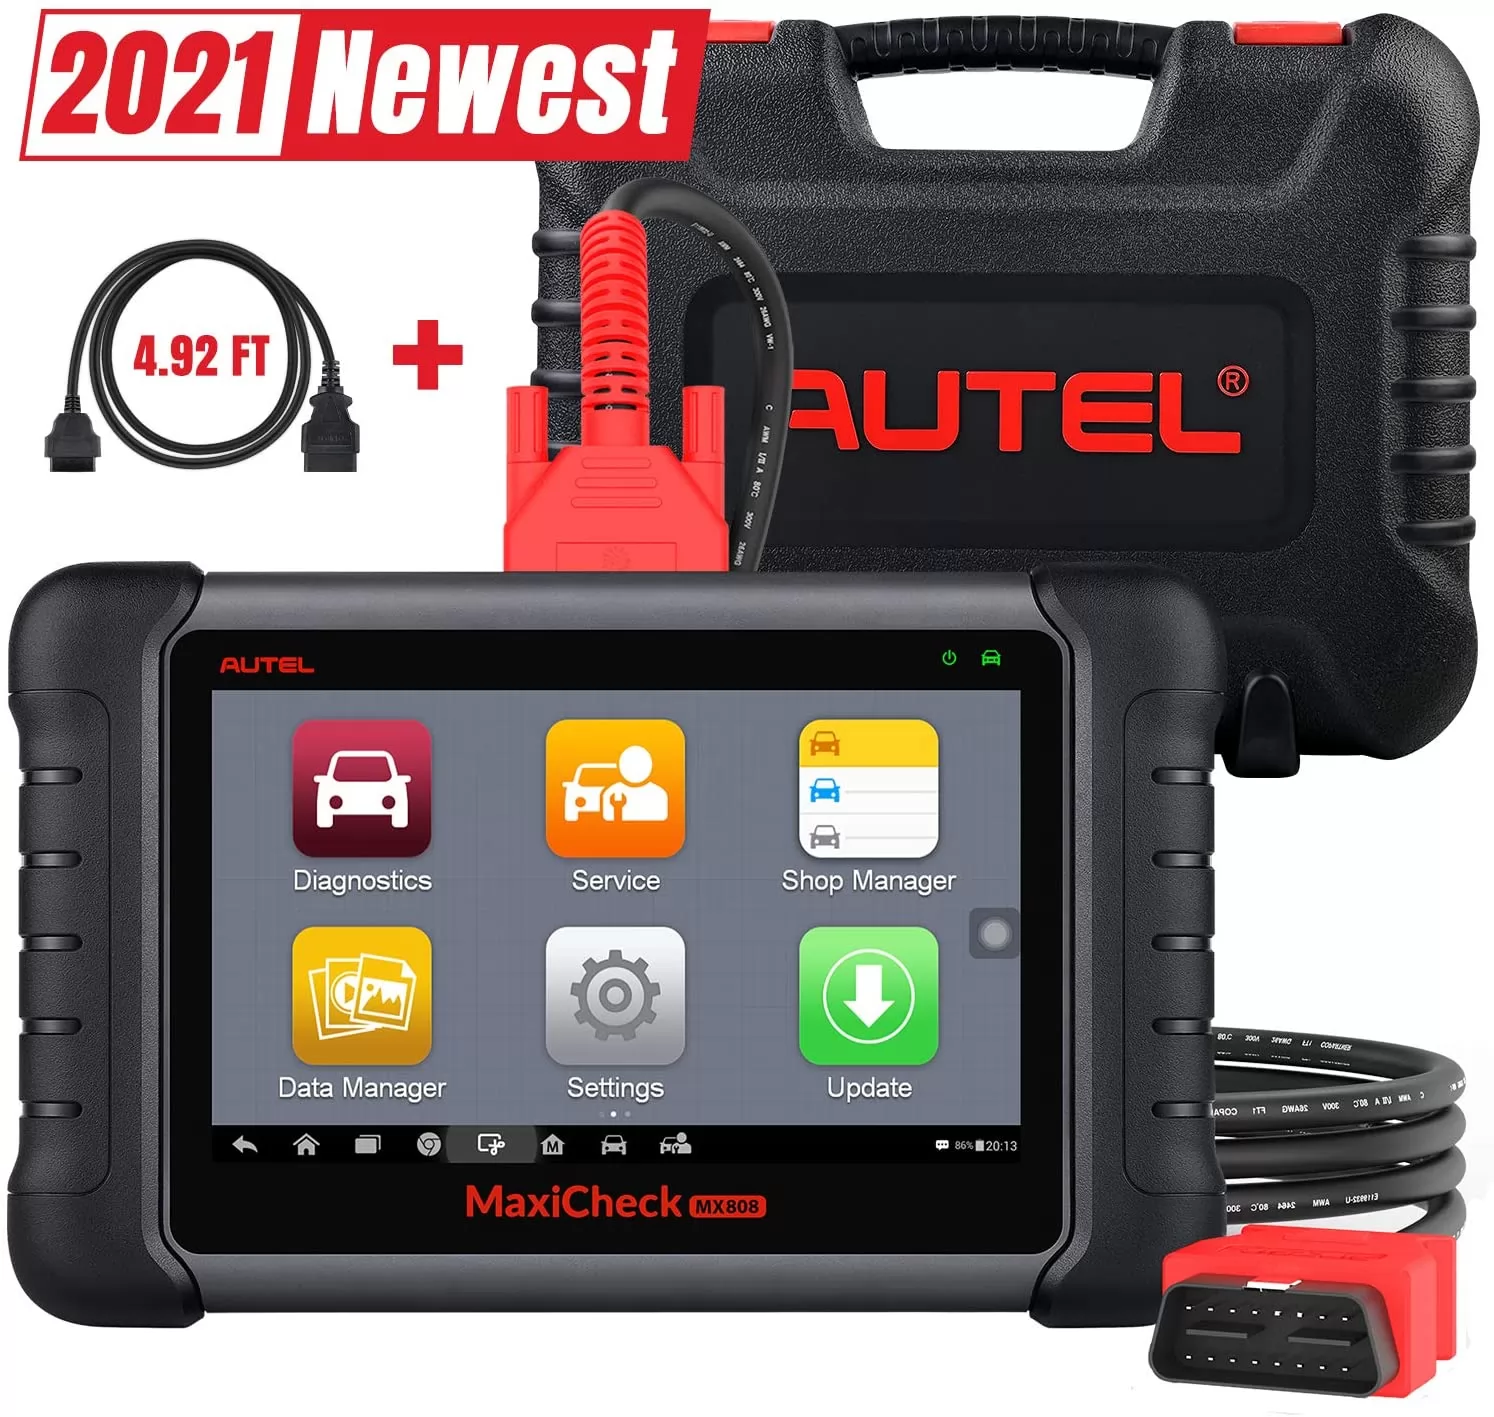 Autel MaxiCheck MX808 Diagnostic Scan Tool 25+ Services, All Systems Diagnosis, IMMO, EPB, ABS Bleed, Oil Reset, SAS, BMS